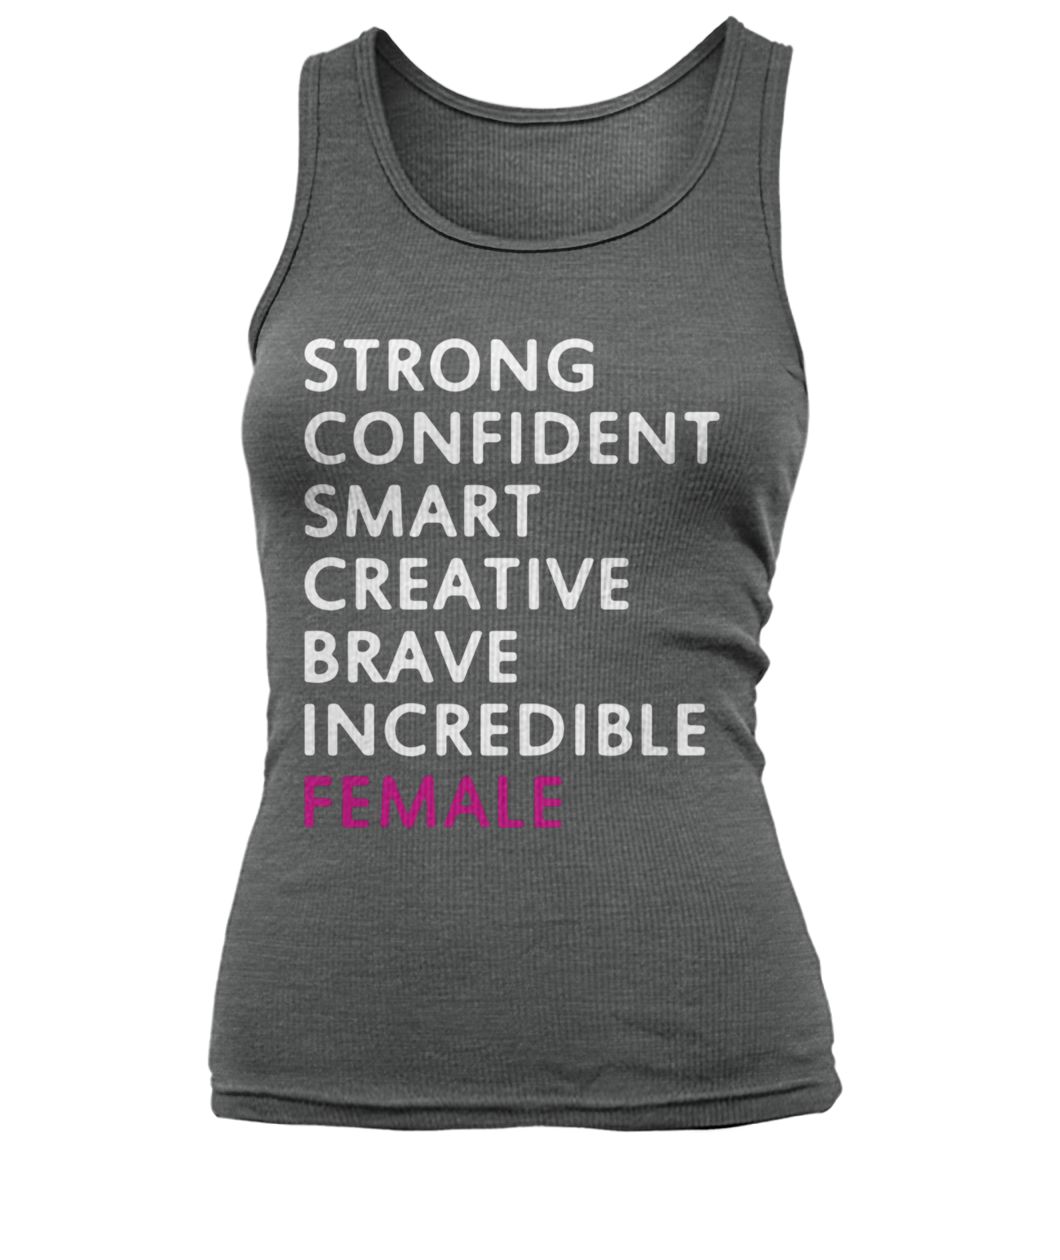 Strong confident smart creative brave incredible female women's tank top